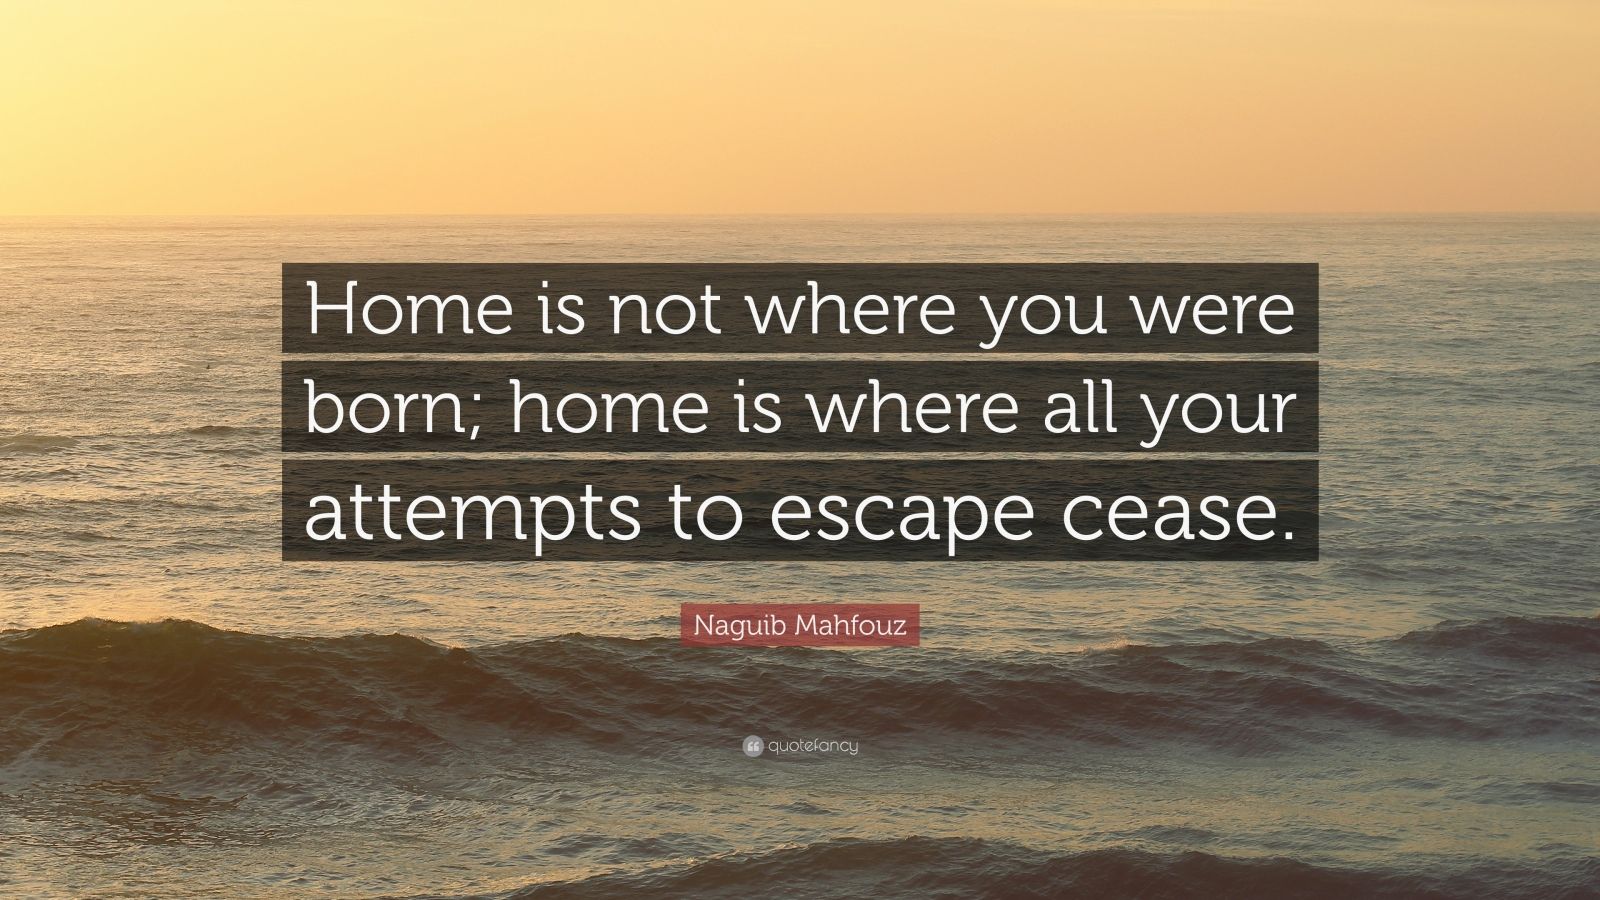 Naguib Mahfouz Quote: “Home is not where you were born; home is where